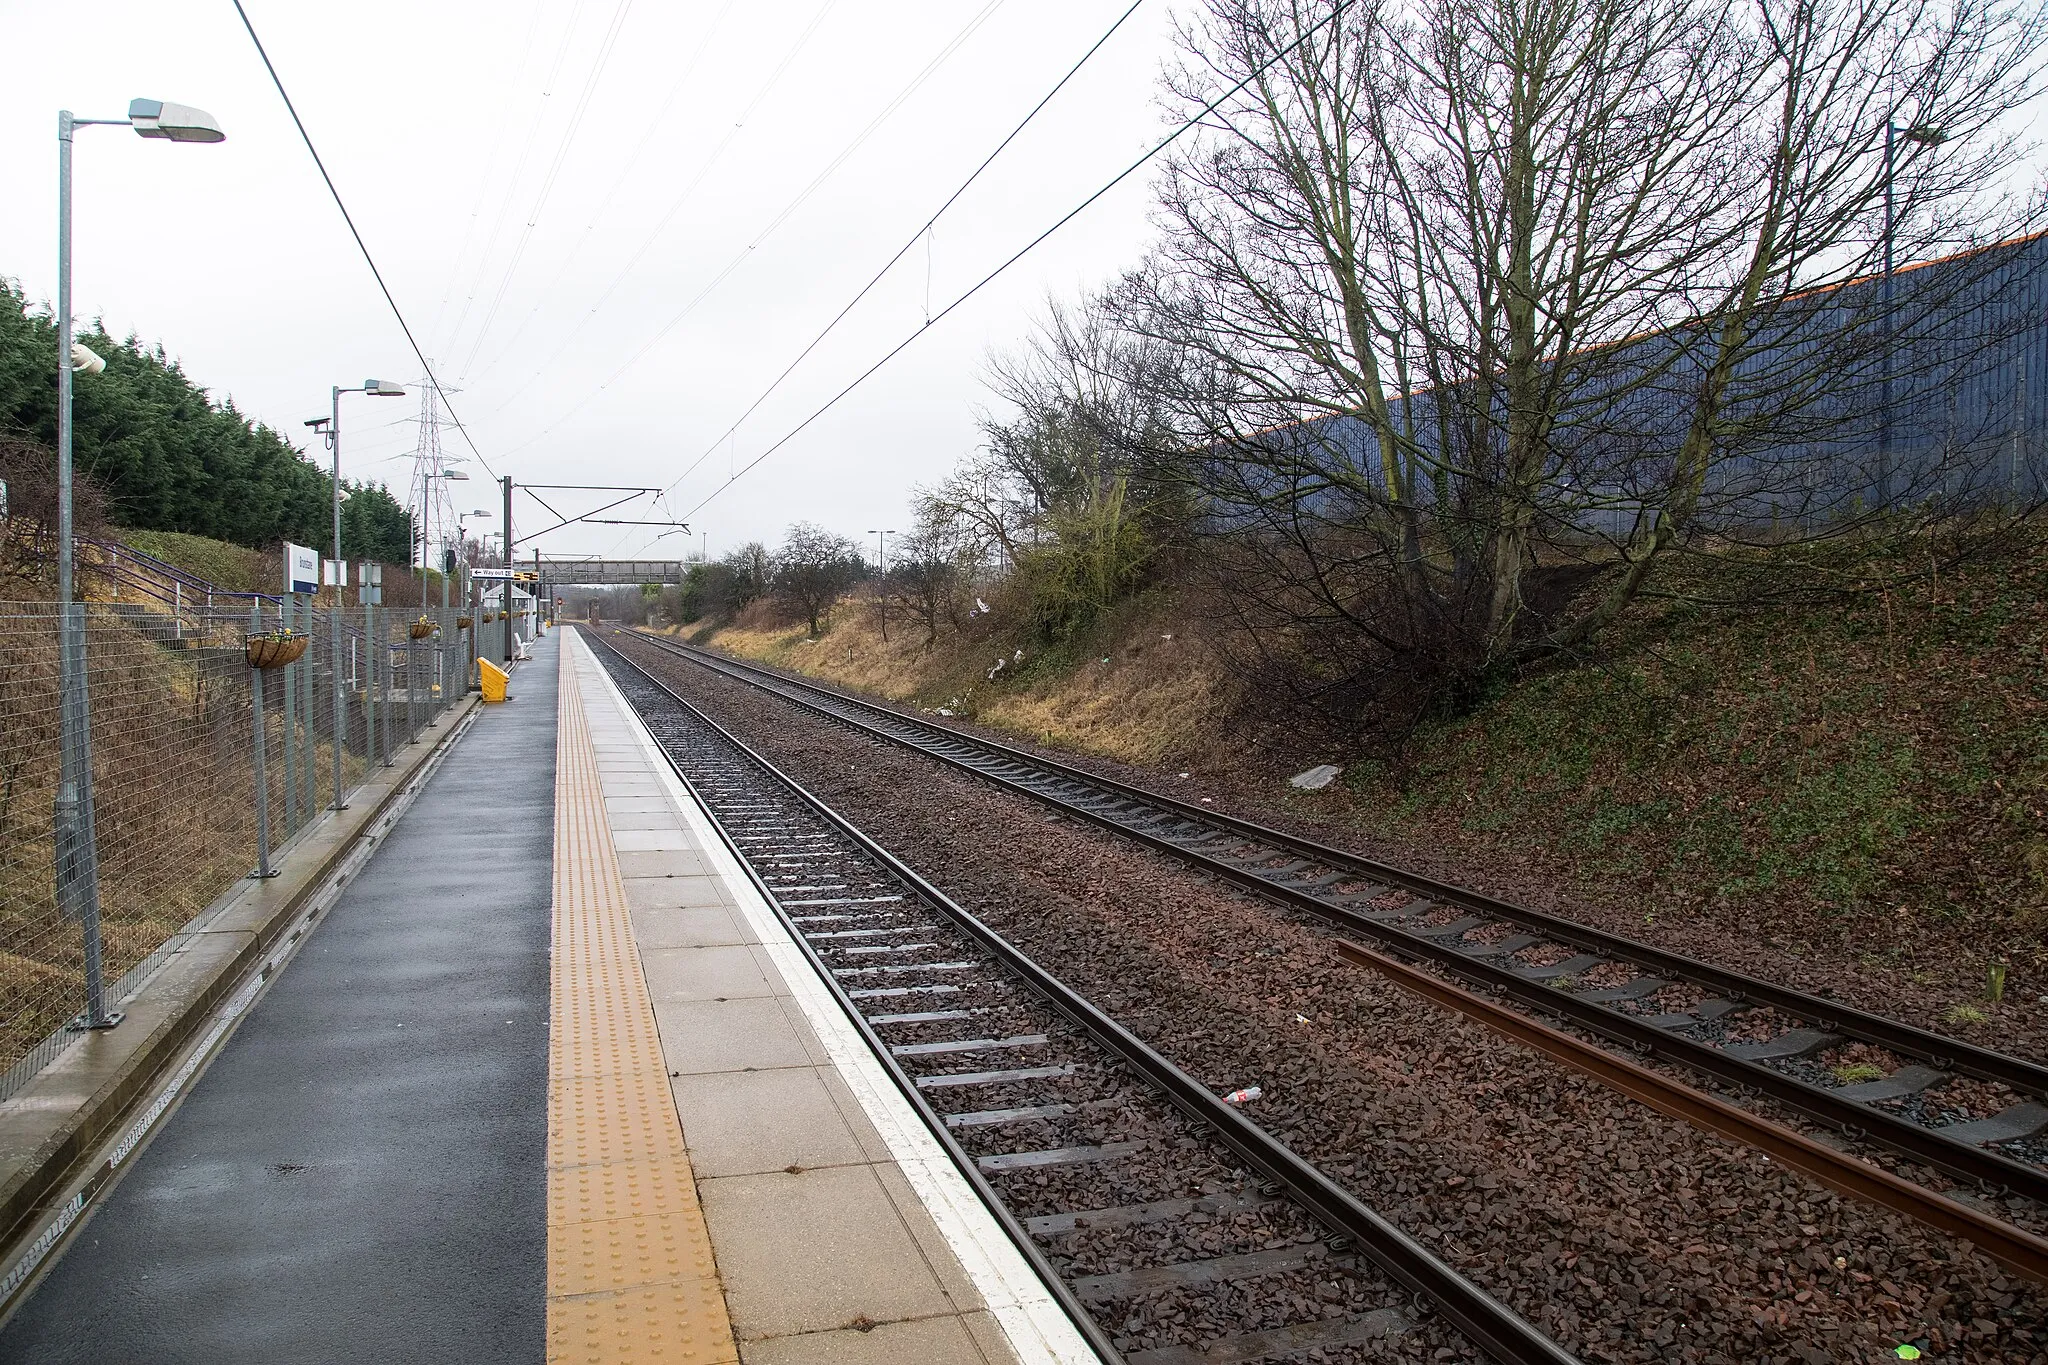 Photo showing: South view at Brunstane railway station on the Borders Railway. A view down the platform of Brunstane railway station in Edinburgh. Brunstane is a station in Edinburgh and is the first stopping point on the Borders Railway after Edinburgh Waverley. The next station on the line in the south direction is Newcraighall.